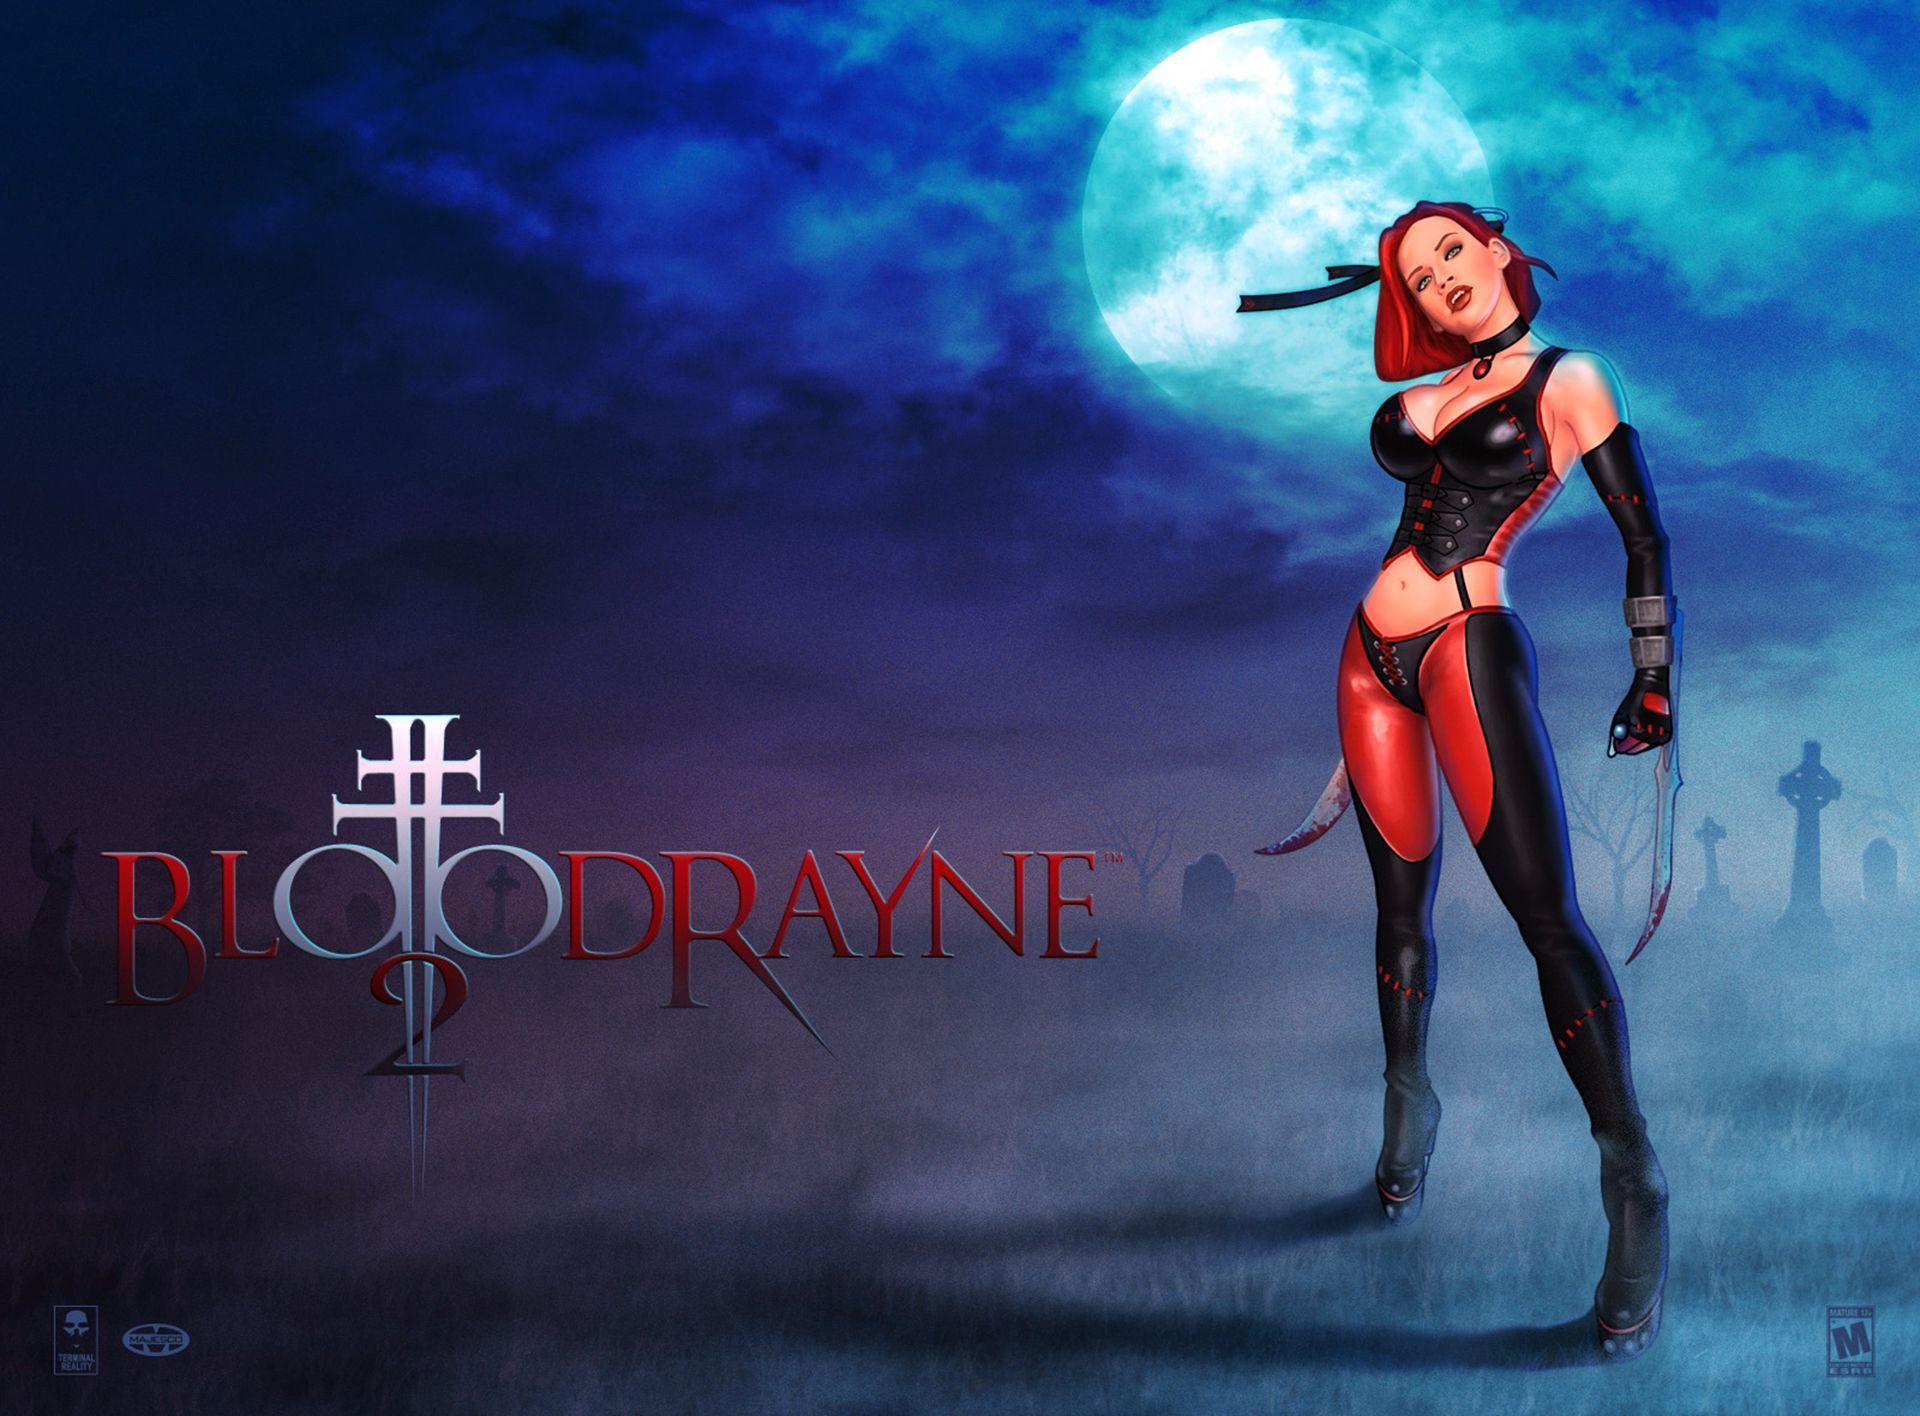 BloodRayne 2 wallpaper picture download